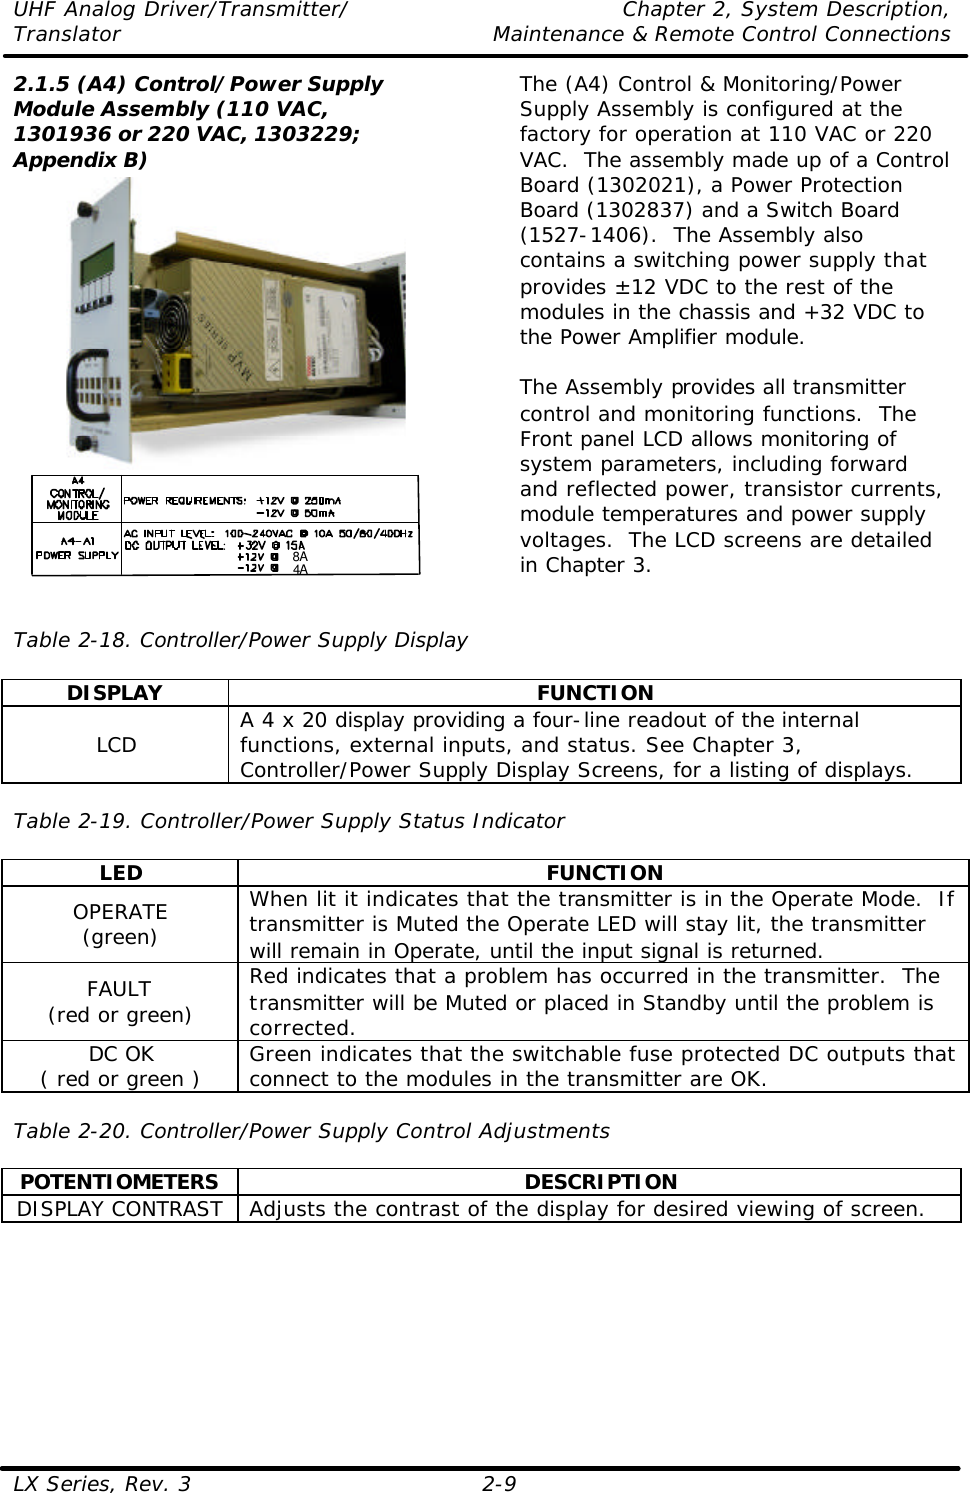 UHF Analog Driver/Transmitter/ Chapter 2, System Description, Translator Maintenance &amp; Remote Control Connections LX Series, Rev. 3 2-9 2.1.5 (A4) Control/Power Supply Module Assembly (110 VAC, 1301936 or 220 VAC, 1303229; Appendix B)    8 A4 A The (A4) Control &amp; Monitoring/Power Supply Assembly is configured at the factory for operation at 110 VAC or 220 VAC.  The assembly made up of a Control Board (1302021), a Power Protection Board (1302837) and a Switch Board (1527-1406).  The Assembly also contains a switching power supply that provides ±12 VDC to the rest of the modules in the chassis and +32 VDC to the Power Amplifier module.  The Assembly provides all transmitter control and monitoring functions.  The Front panel LCD allows monitoring of system parameters, including forward and reflected power, transistor currents, module temperatures and power supply voltages.  The LCD screens are detailed in Chapter 3.   Table 2-18. Controller/Power Supply Display  DISPLAY FUNCTION LCD A 4 x 20 display providing a four-line readout of the internal functions, external inputs, and status. See Chapter 3, Controller/Power Supply Display Screens, for a listing of displays.  Table 2-19. Controller/Power Supply Status Indicator  LED FUNCTION OPERATE (green) When lit it indicates that the transmitter is in the Operate Mode.  If transmitter is Muted the Operate LED will stay lit, the transmitter will remain in Operate, until the input signal is returned. FAULT (red or green) Red indicates that a problem has occurred in the transmitter.  The transmitter will be Muted or placed in Standby until the problem is corrected. DC OK ( red or green ) Green indicates that the switchable fuse protected DC outputs that connect to the modules in the transmitter are OK.  Table 2-20. Controller/Power Supply Control Adjustments  POTENTIOMETERS DESCRIPTION DISPLAY CONTRAST Adjusts the contrast of the display for desired viewing of screen.  